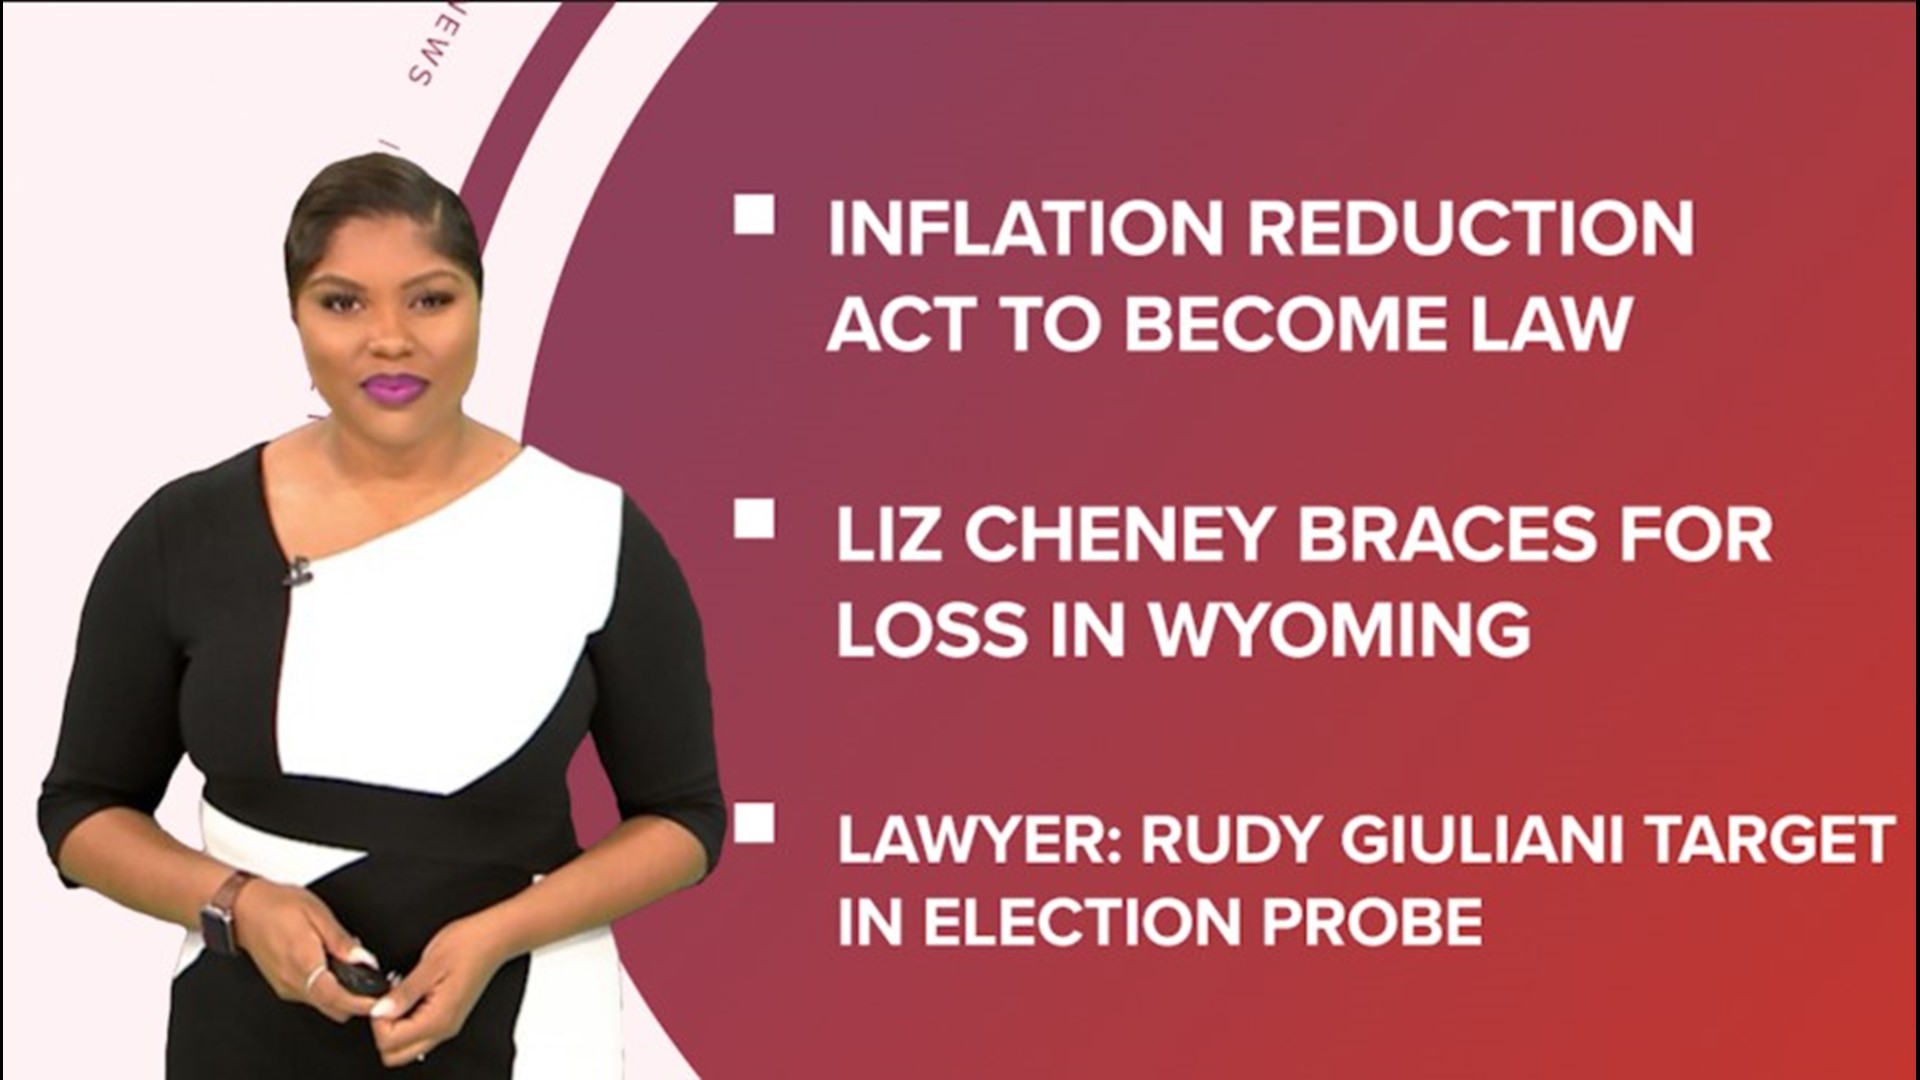 A look at what is happening in the news from Liz Cheney possibly losing the Wyoming primary to the Inflation Reduction Act becoming law and a Capri Sun recall.